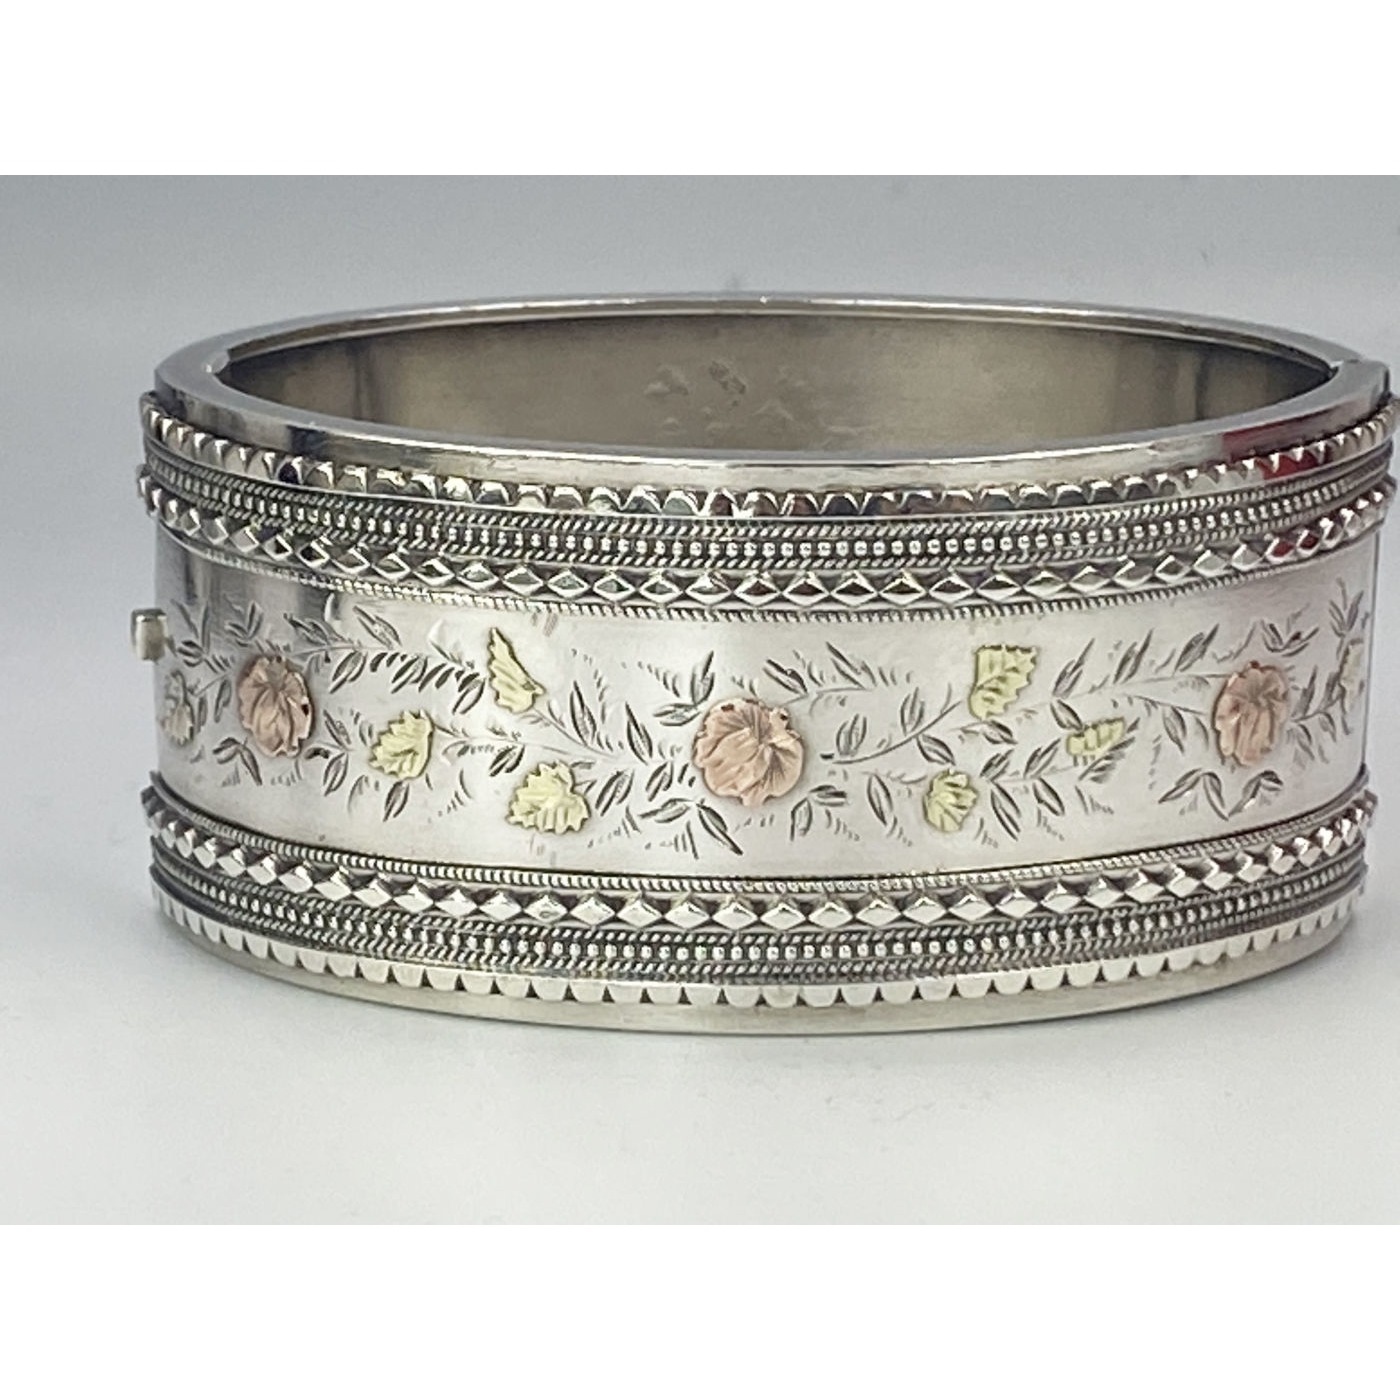 Gallery Wire, Beaded Edge, Rose and Yellow Gold Flowers English Silver Bangle